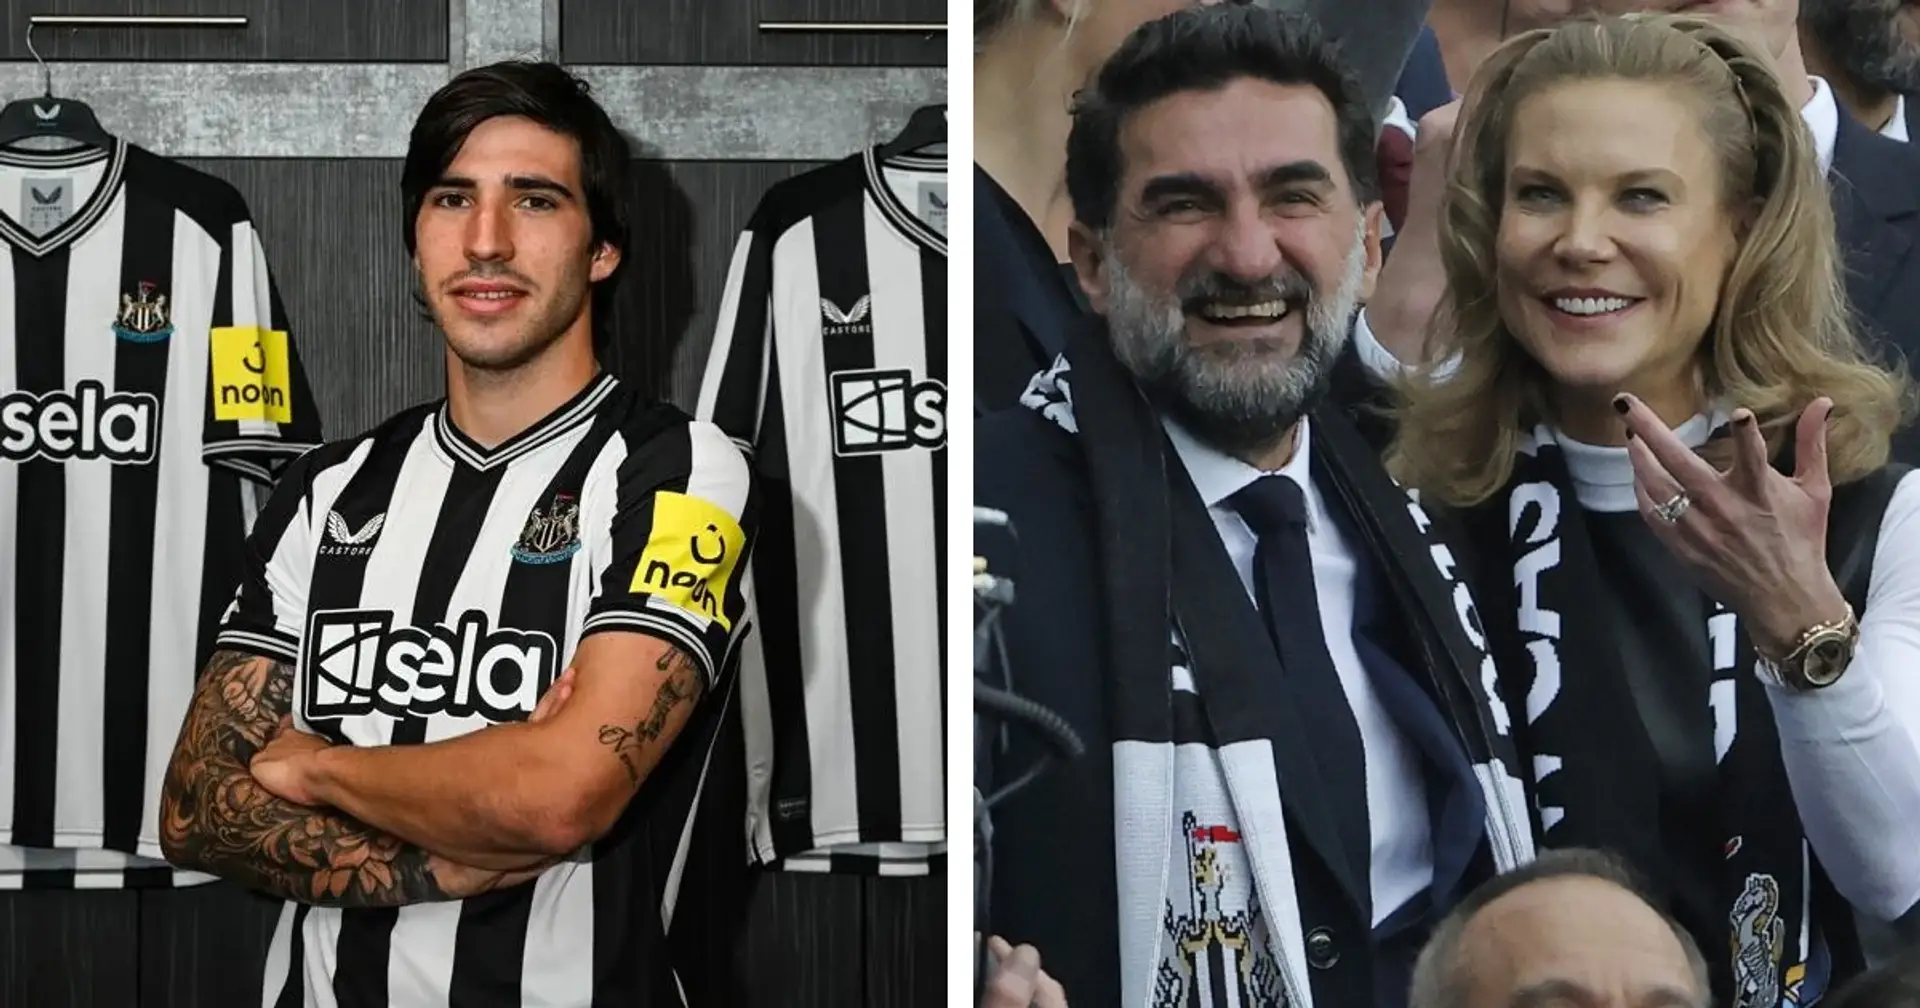 Newcastle linked to 2 Italy stars after Tonali transfer